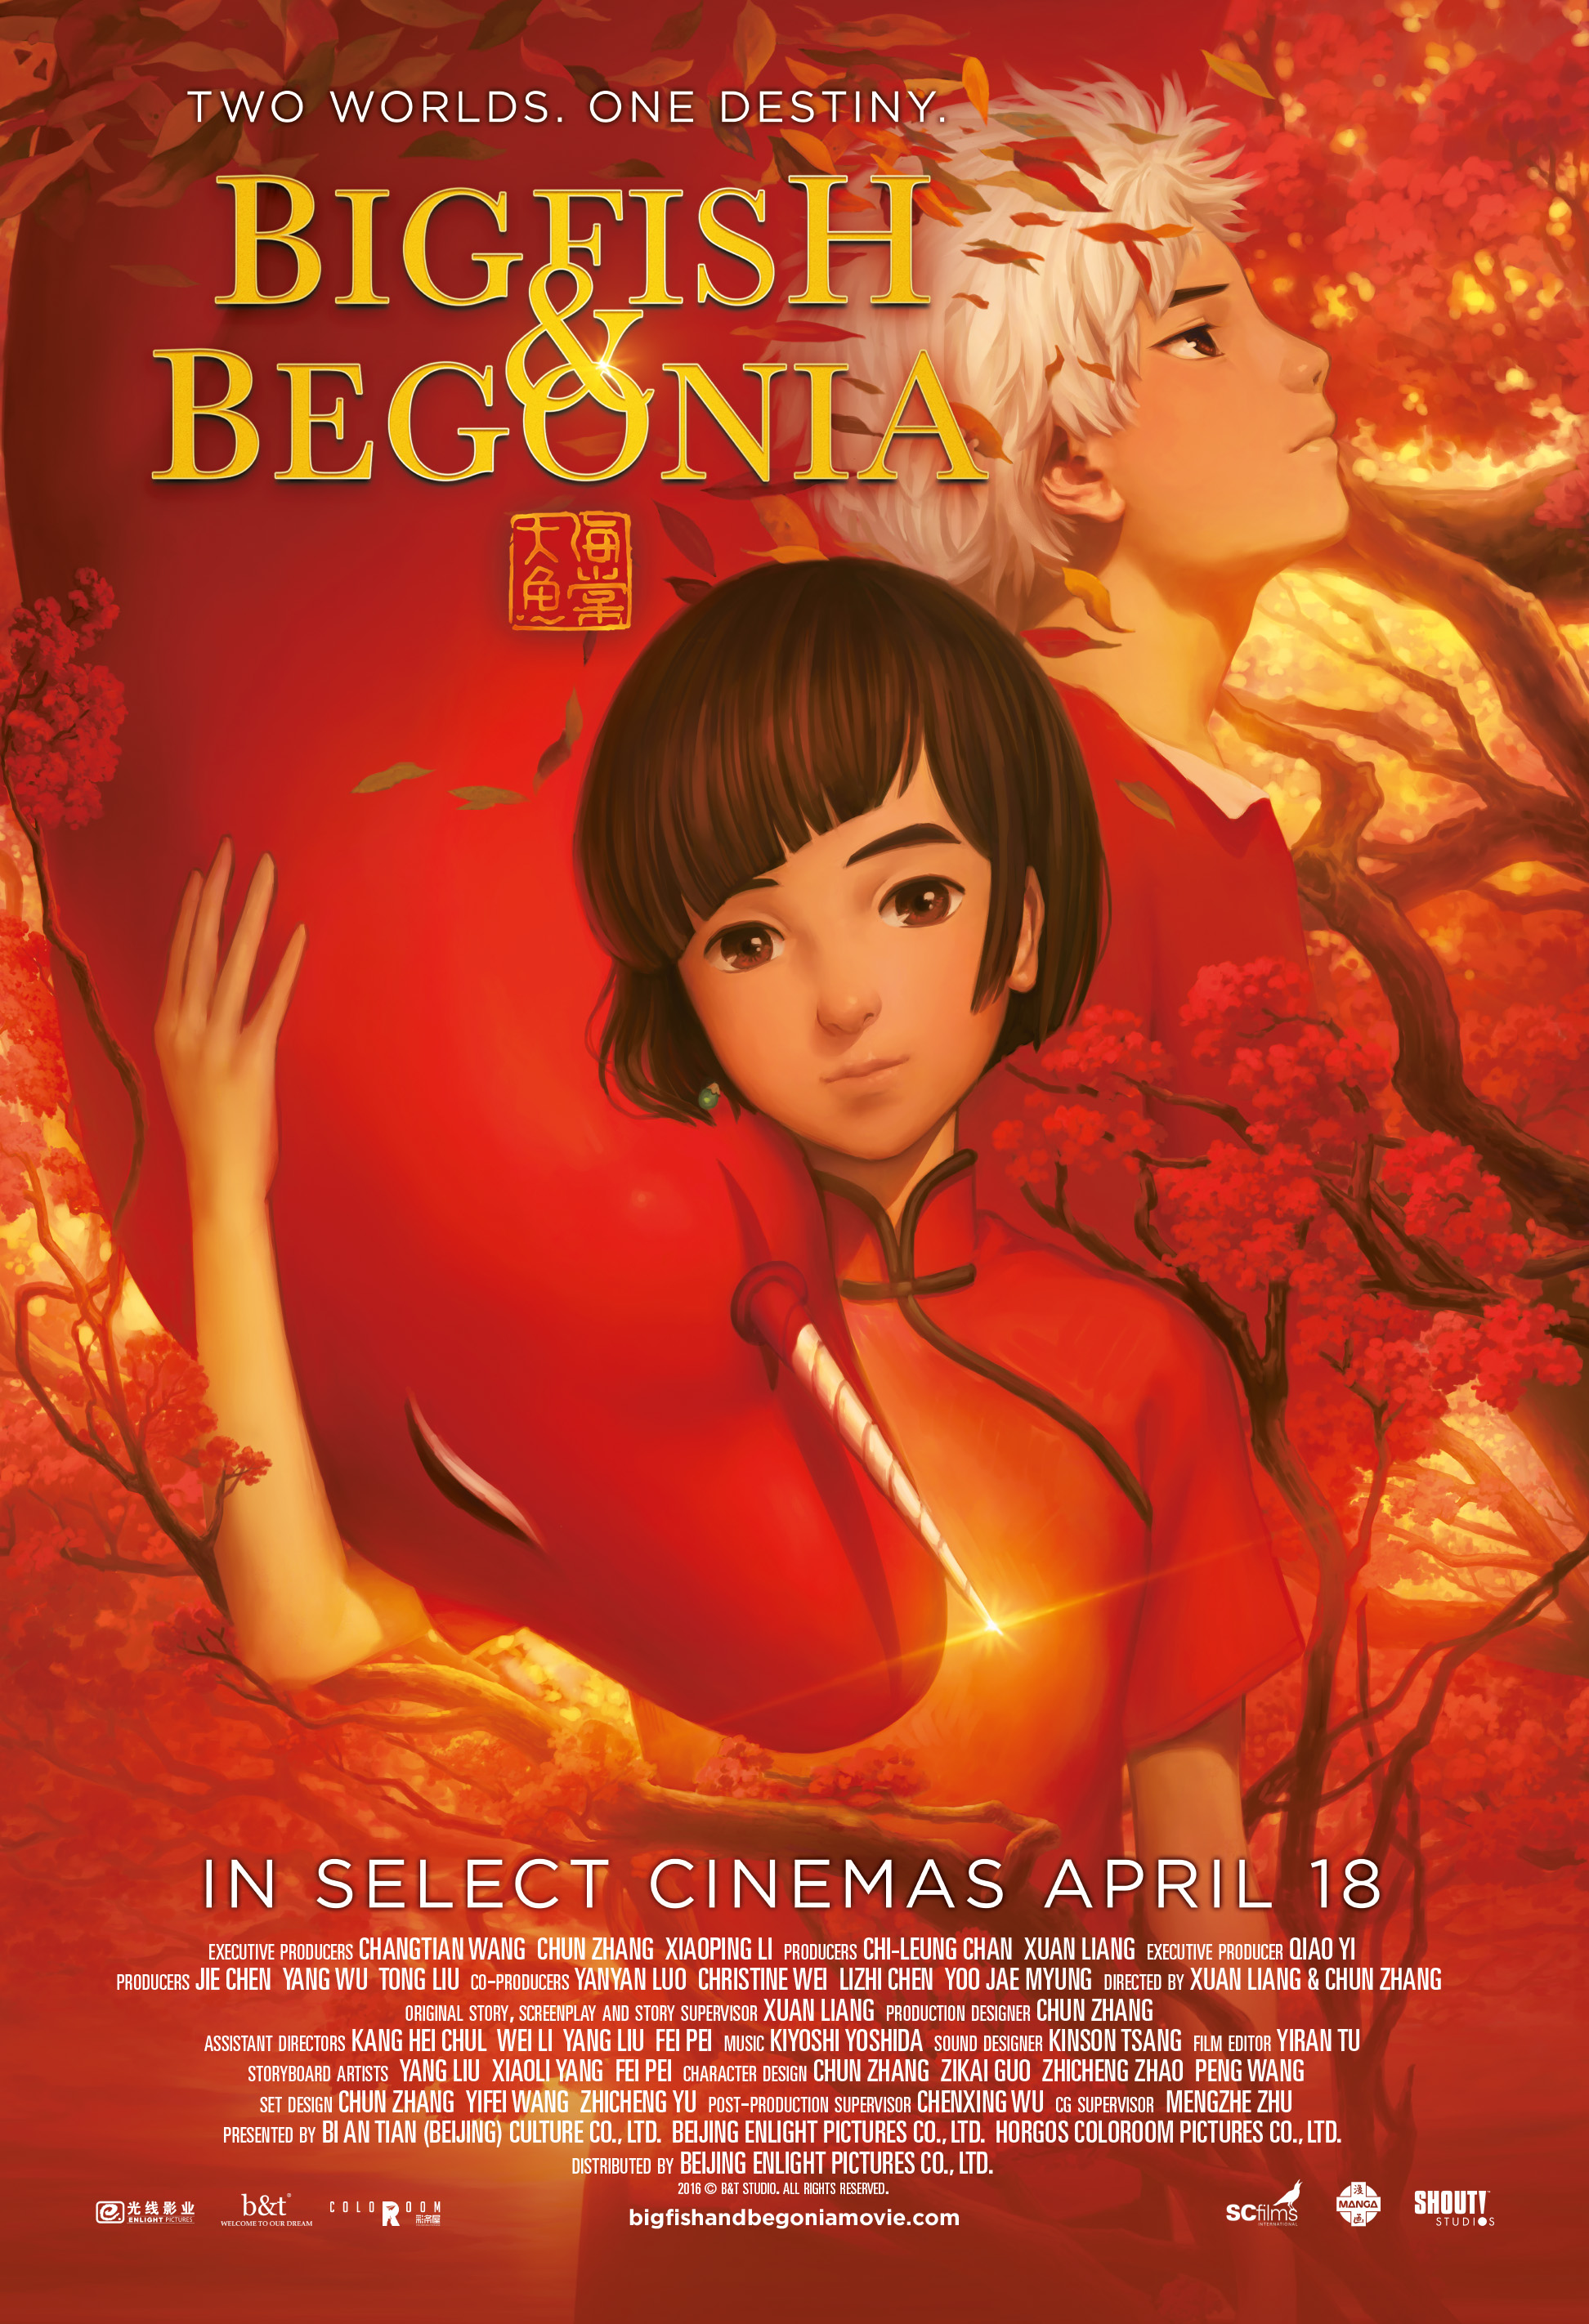 Big Fish & Begonia film review: a beautiful animation with visuals that sing